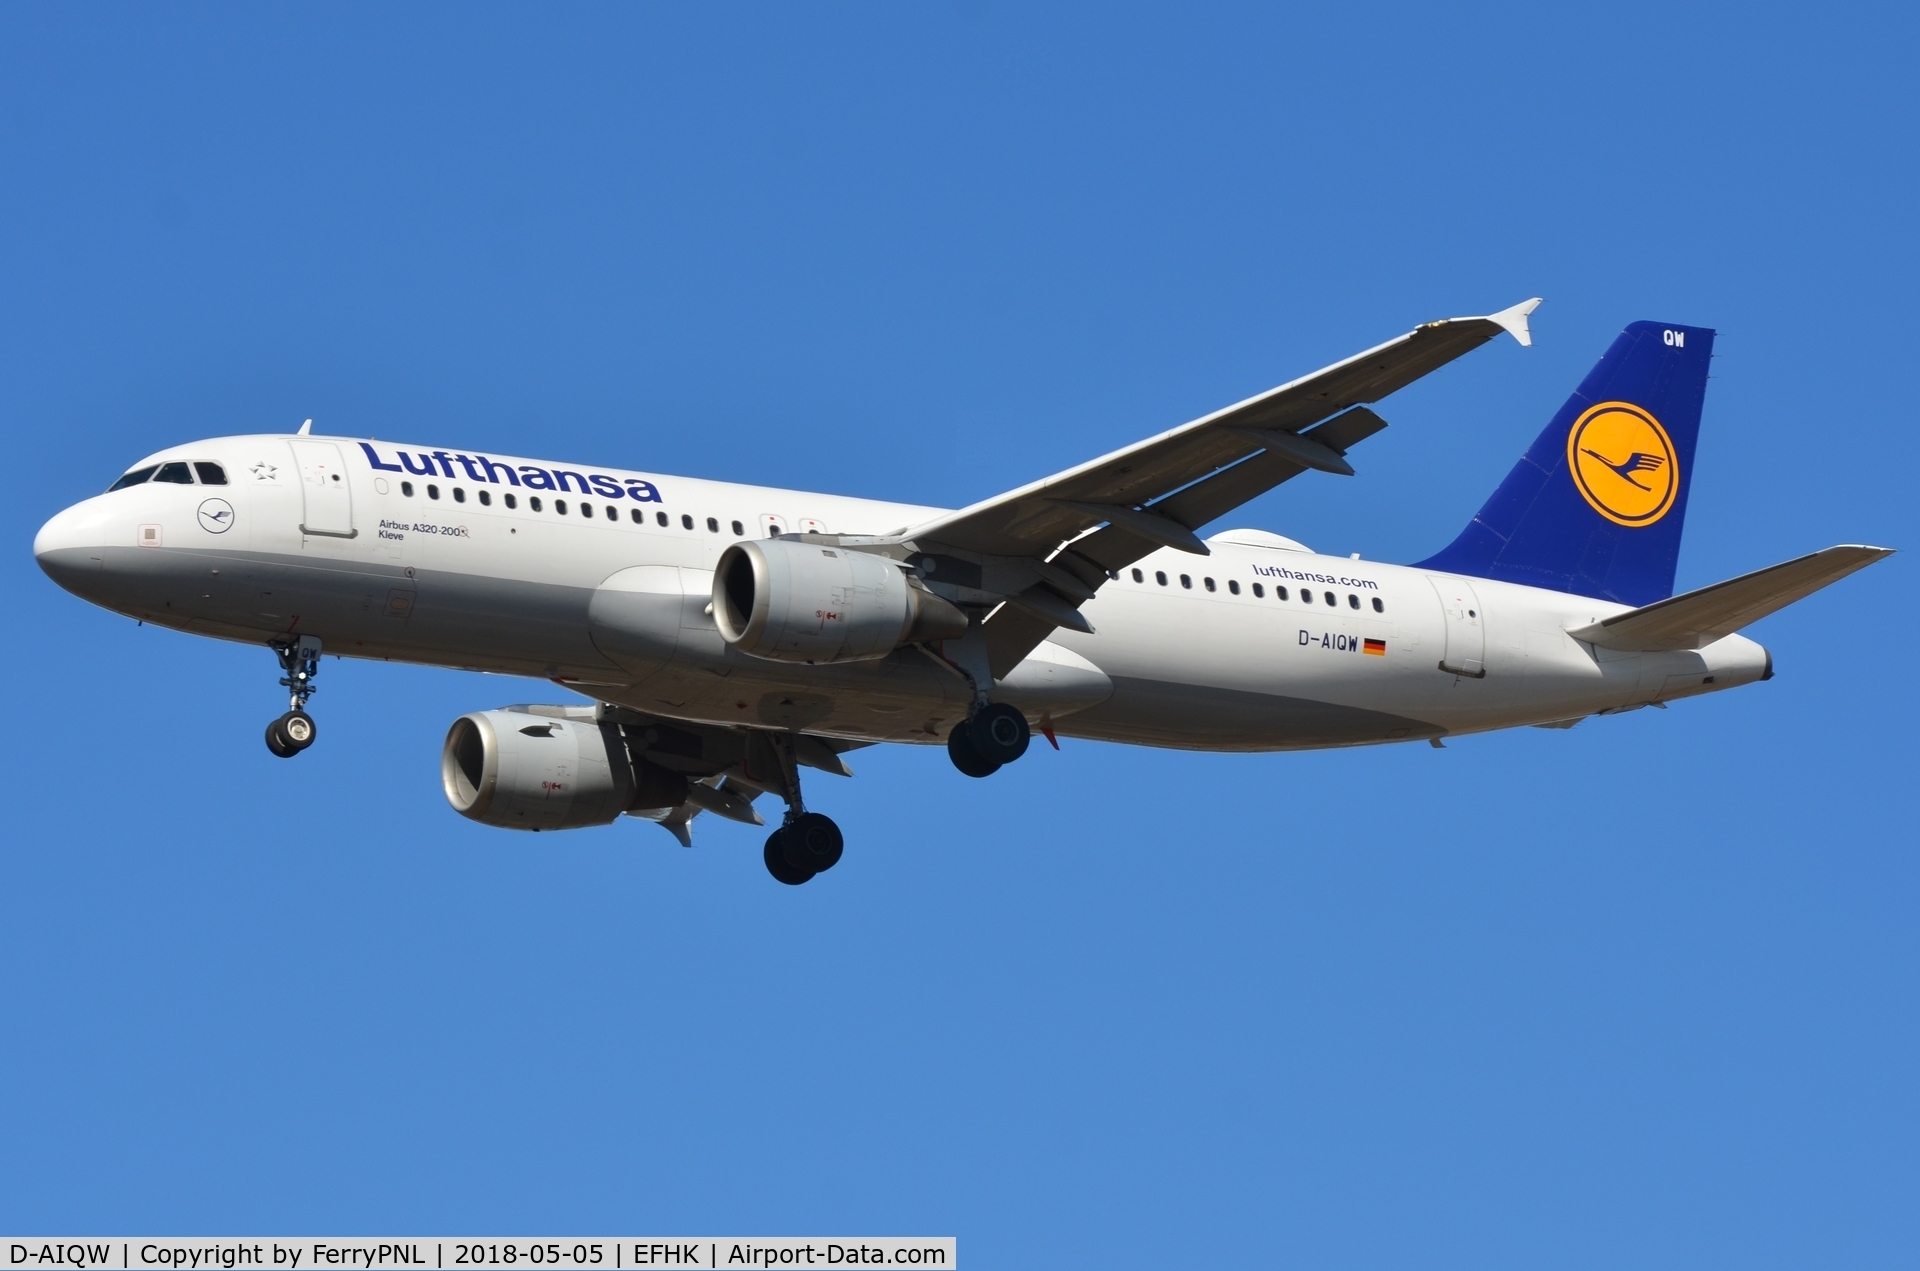 D-AIQW, 2000 Airbus A320-211 C/N 1367, Arrival of Lufthansa A320 from FRA